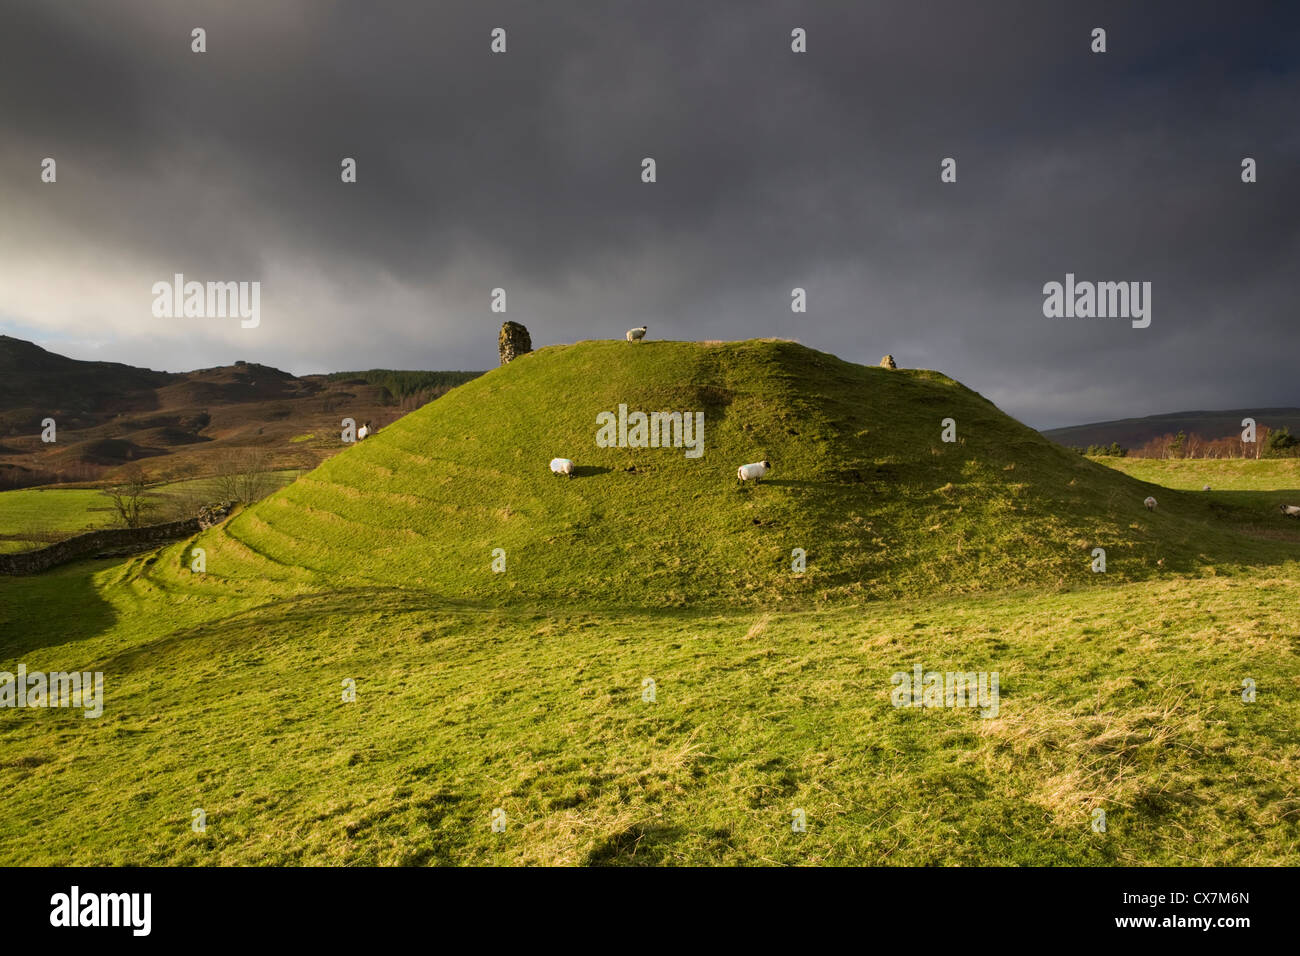 Sheep graze the ruined motte and bailey castle at Harbottle Castle in Northumberland National Park, England Stock Photo